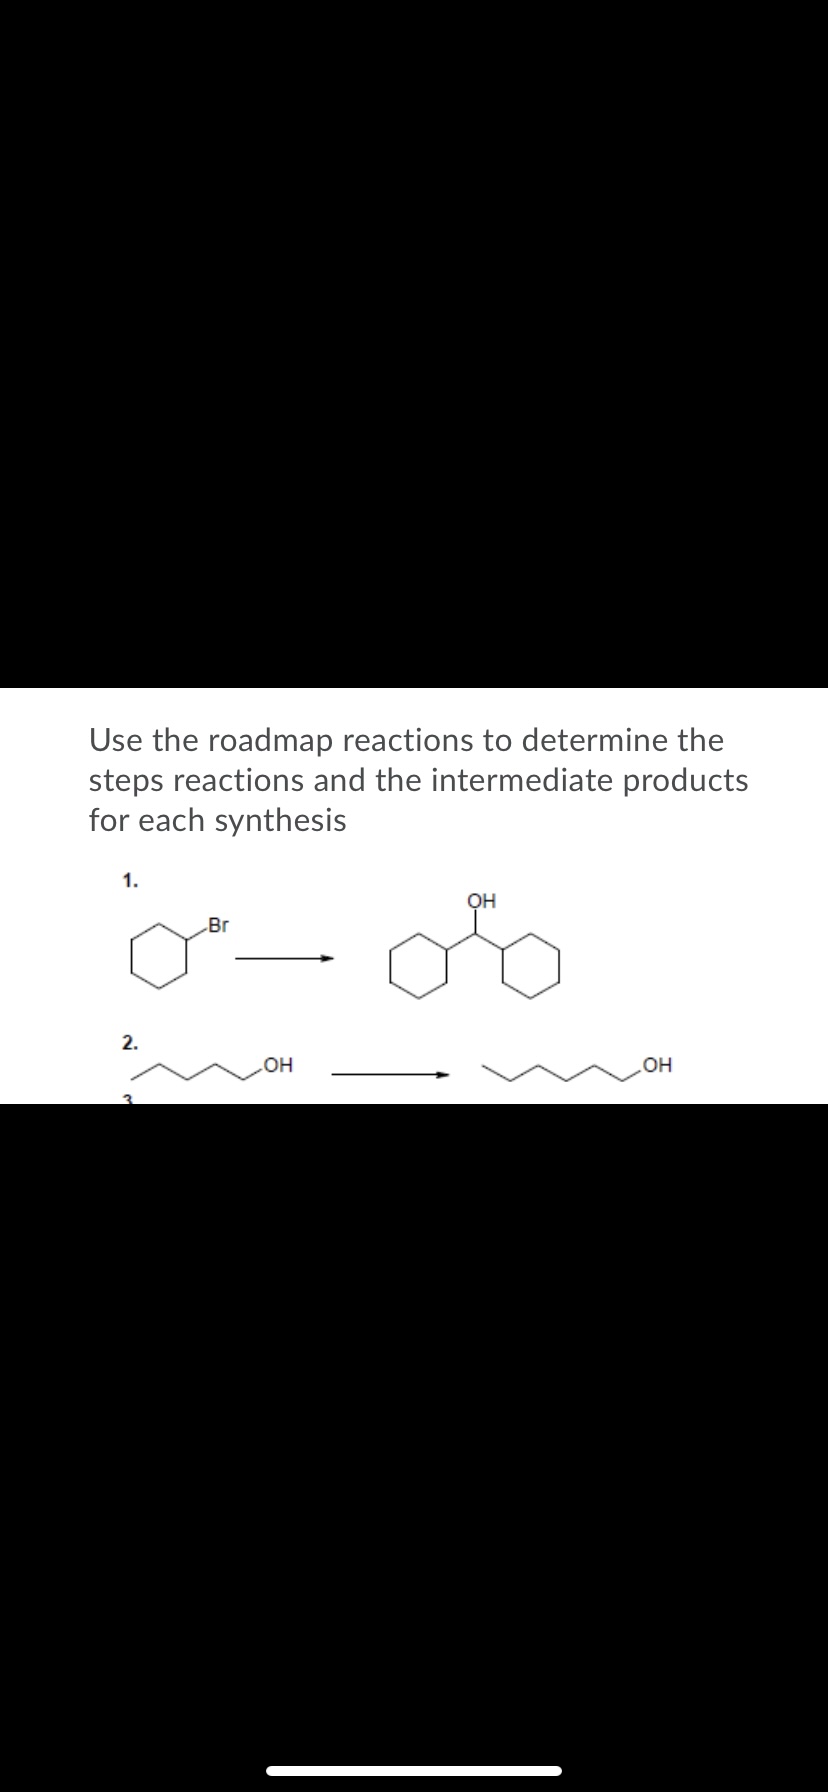 Use the roadmap reactions to determine the
steps reactions and the intermediate products
for each synthesis
1.
OH
Br
2.
Он
но
